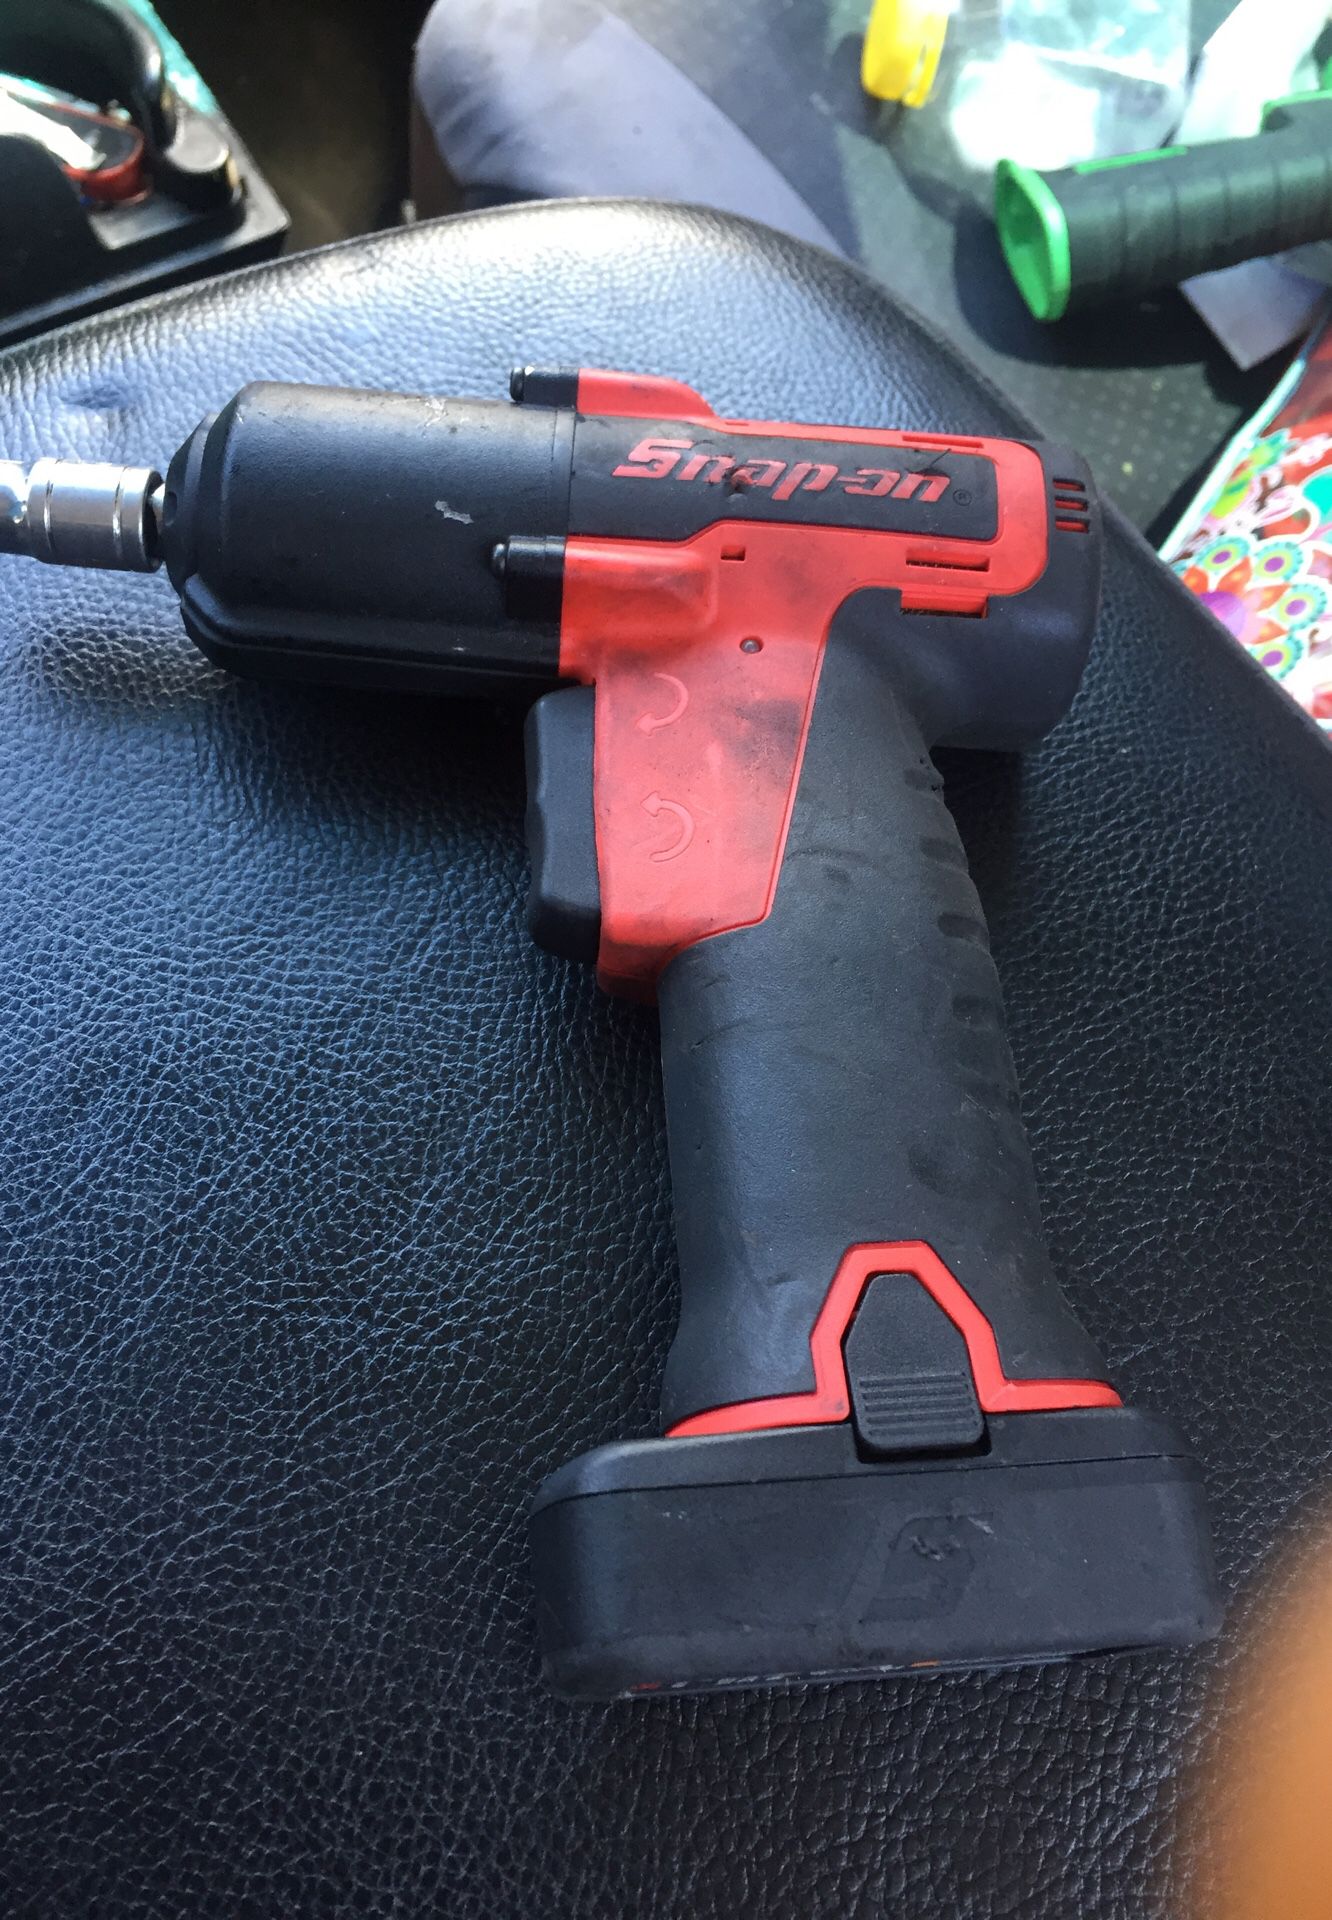 Snap on drill